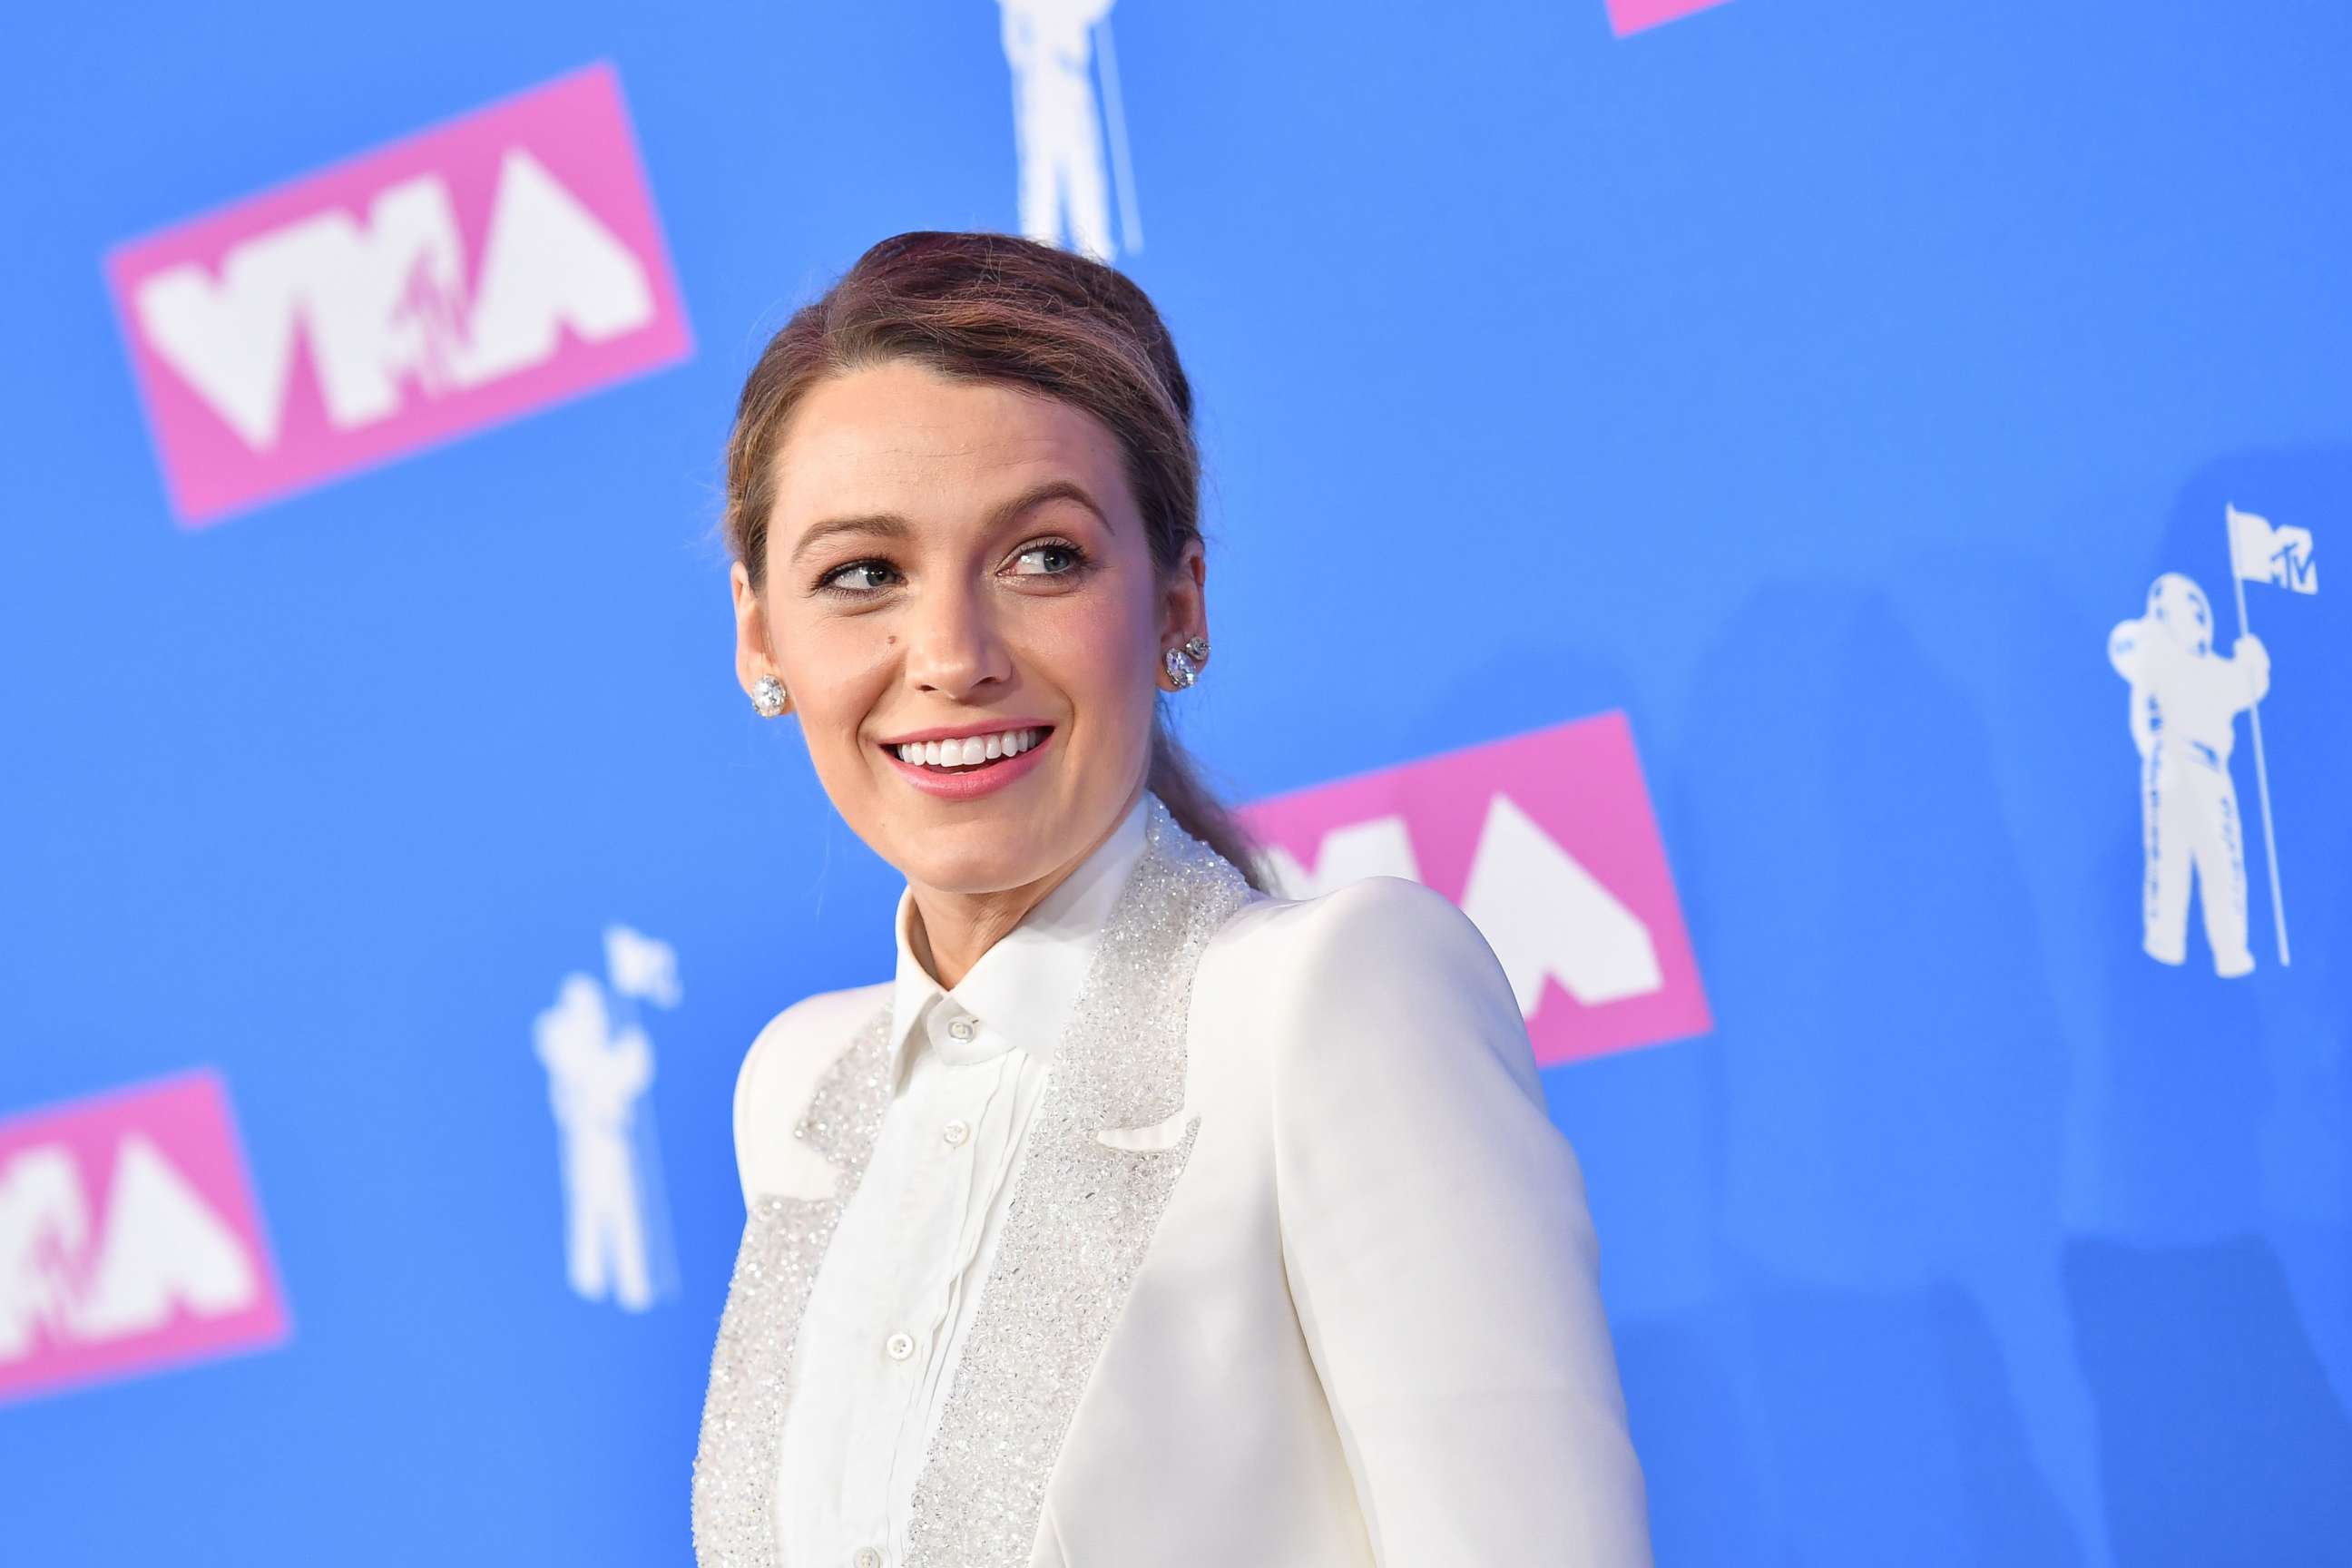 PHOTO: Blake Lively attends the 2018 MTV Video Music Awards at Radio City Music Hall on Aug. 20, 2018 in New York.